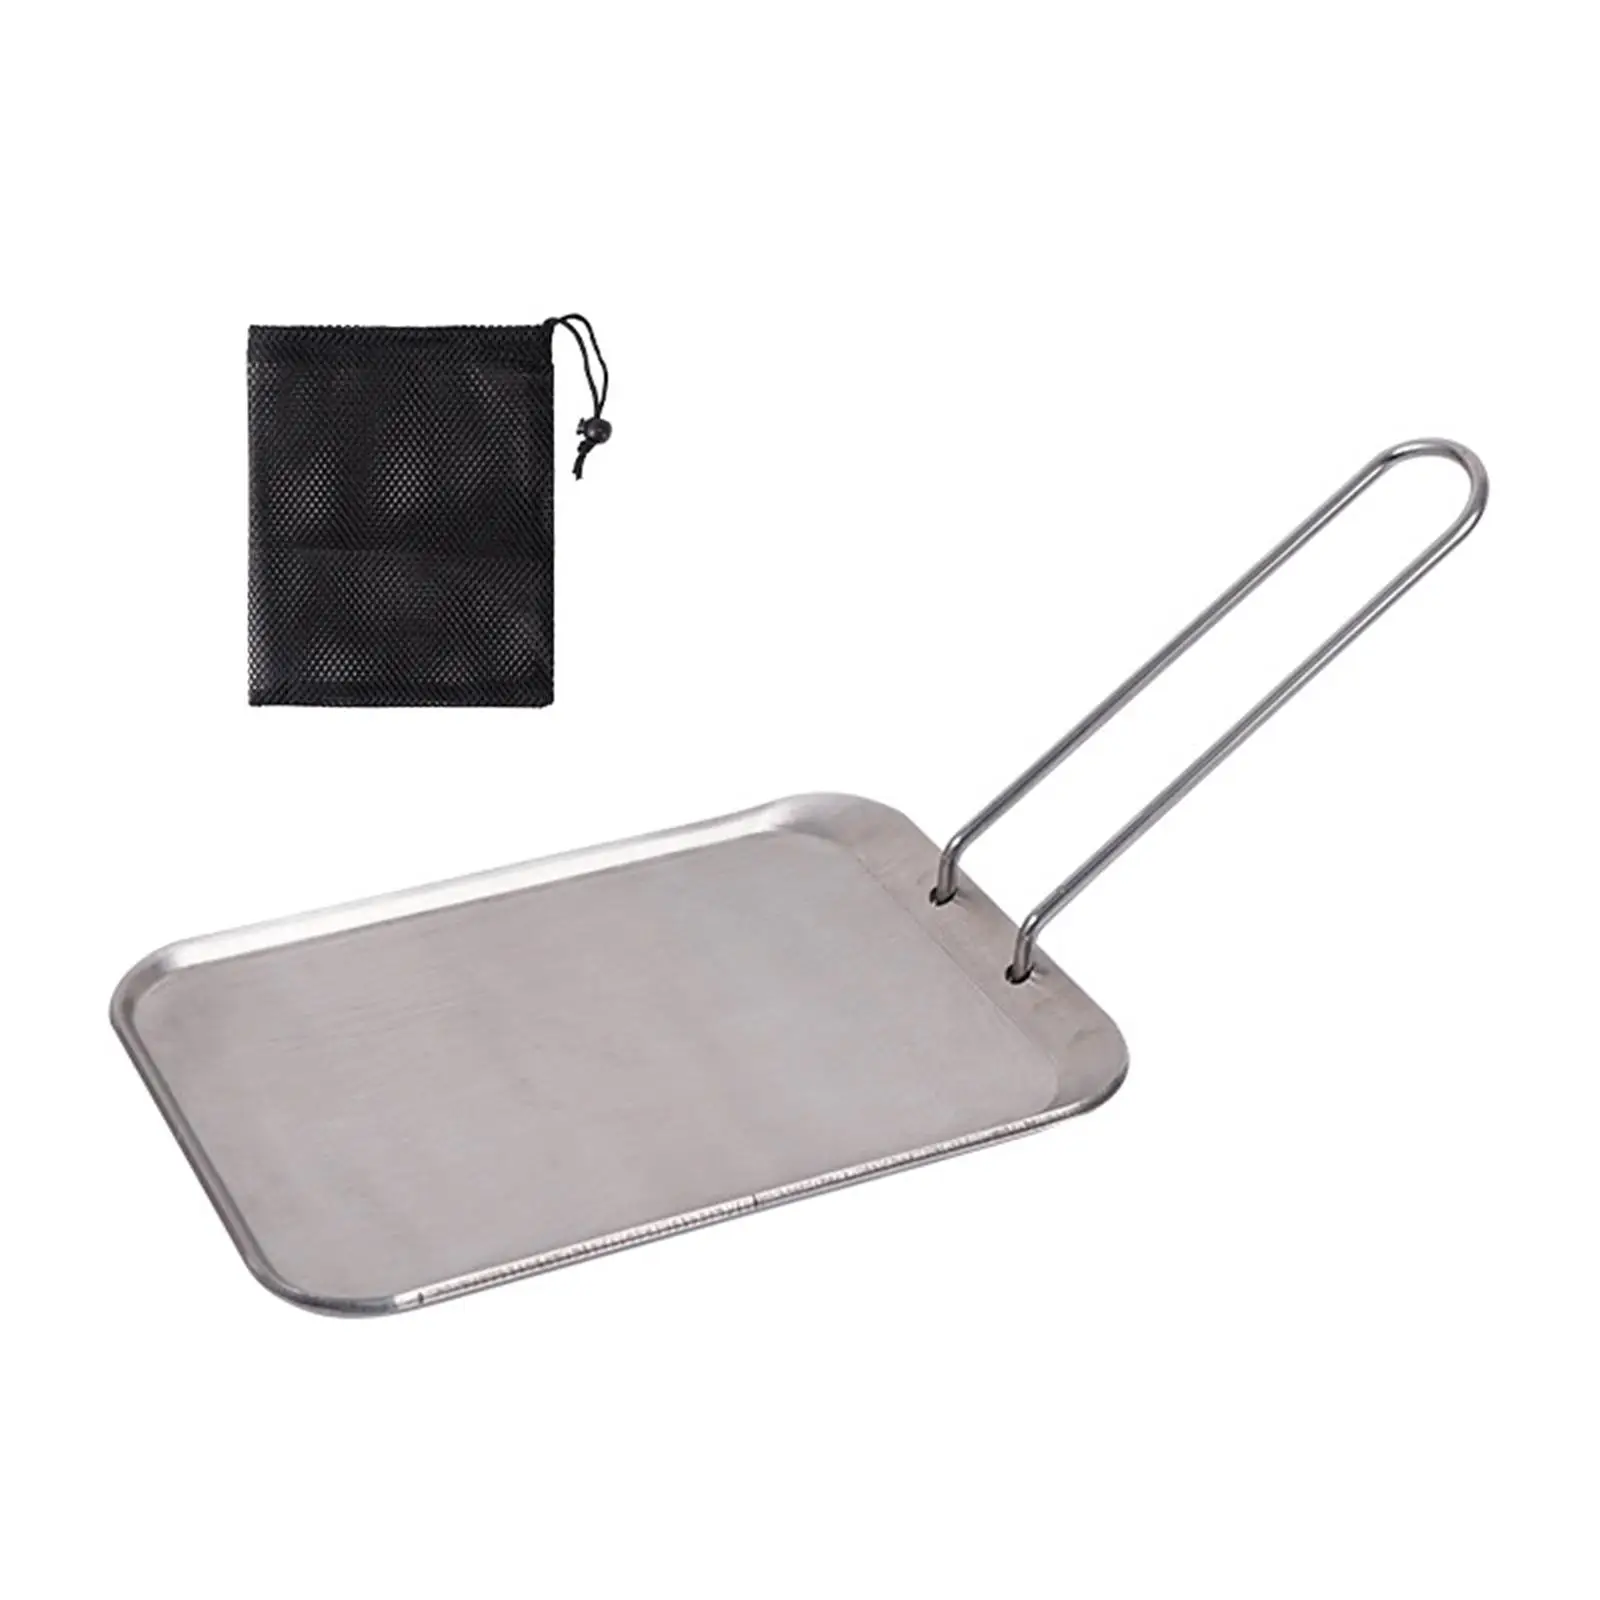 Frying Pan Griddle Hiking with Detachable Handle Grill Pan for Stoves Tops